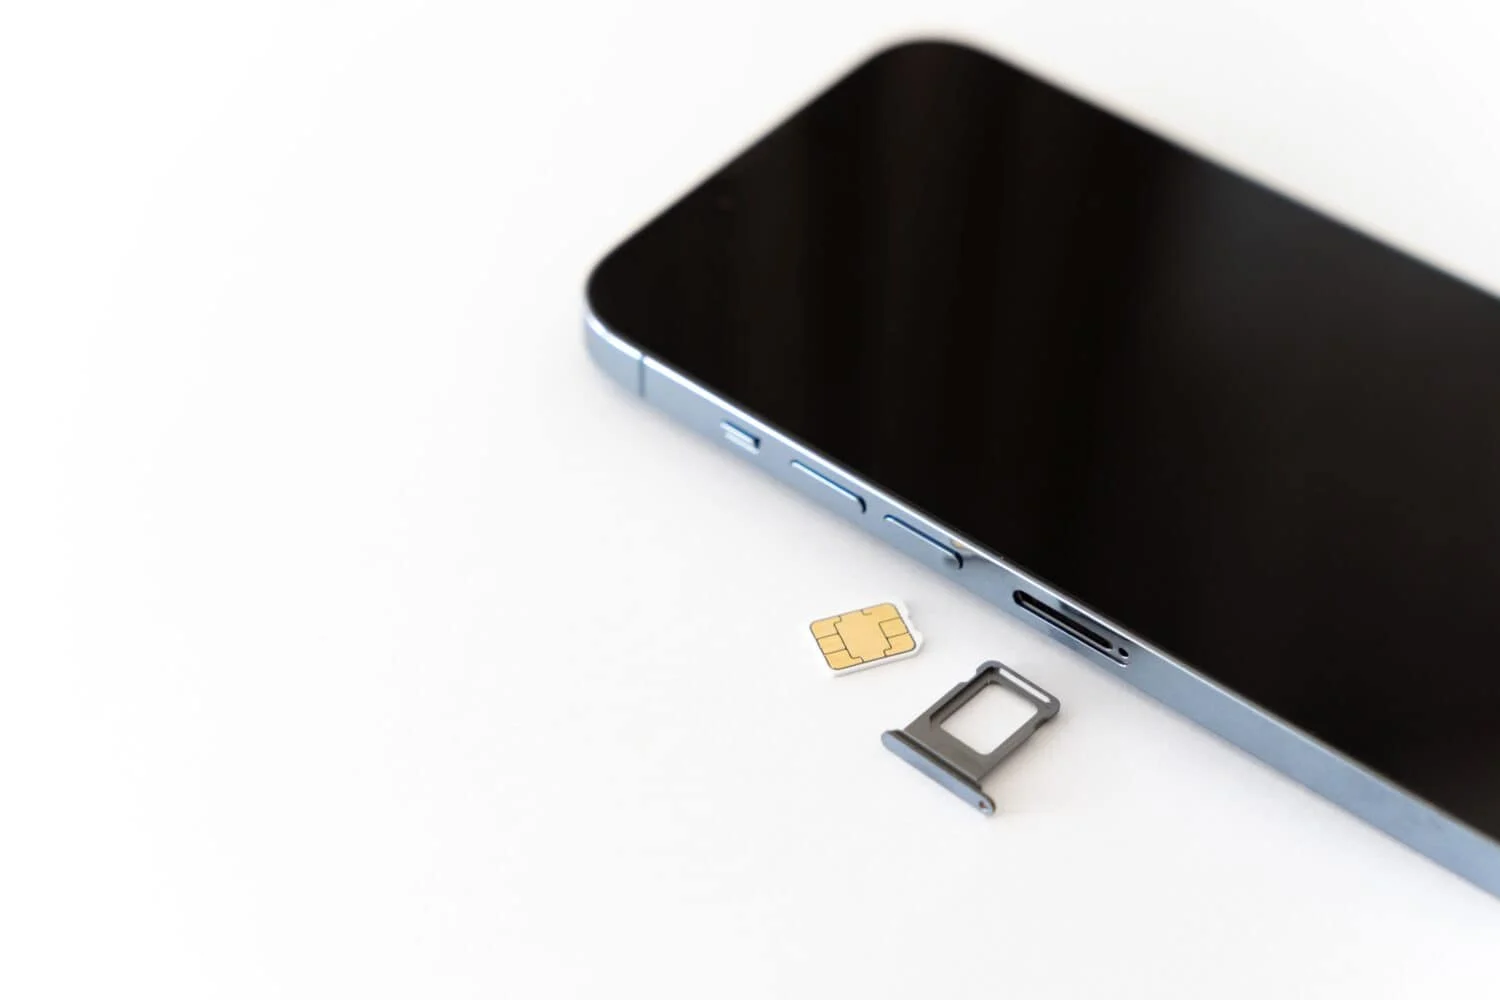 Locating SIM Card Slot On IPhone 3GS: A Quick Guide